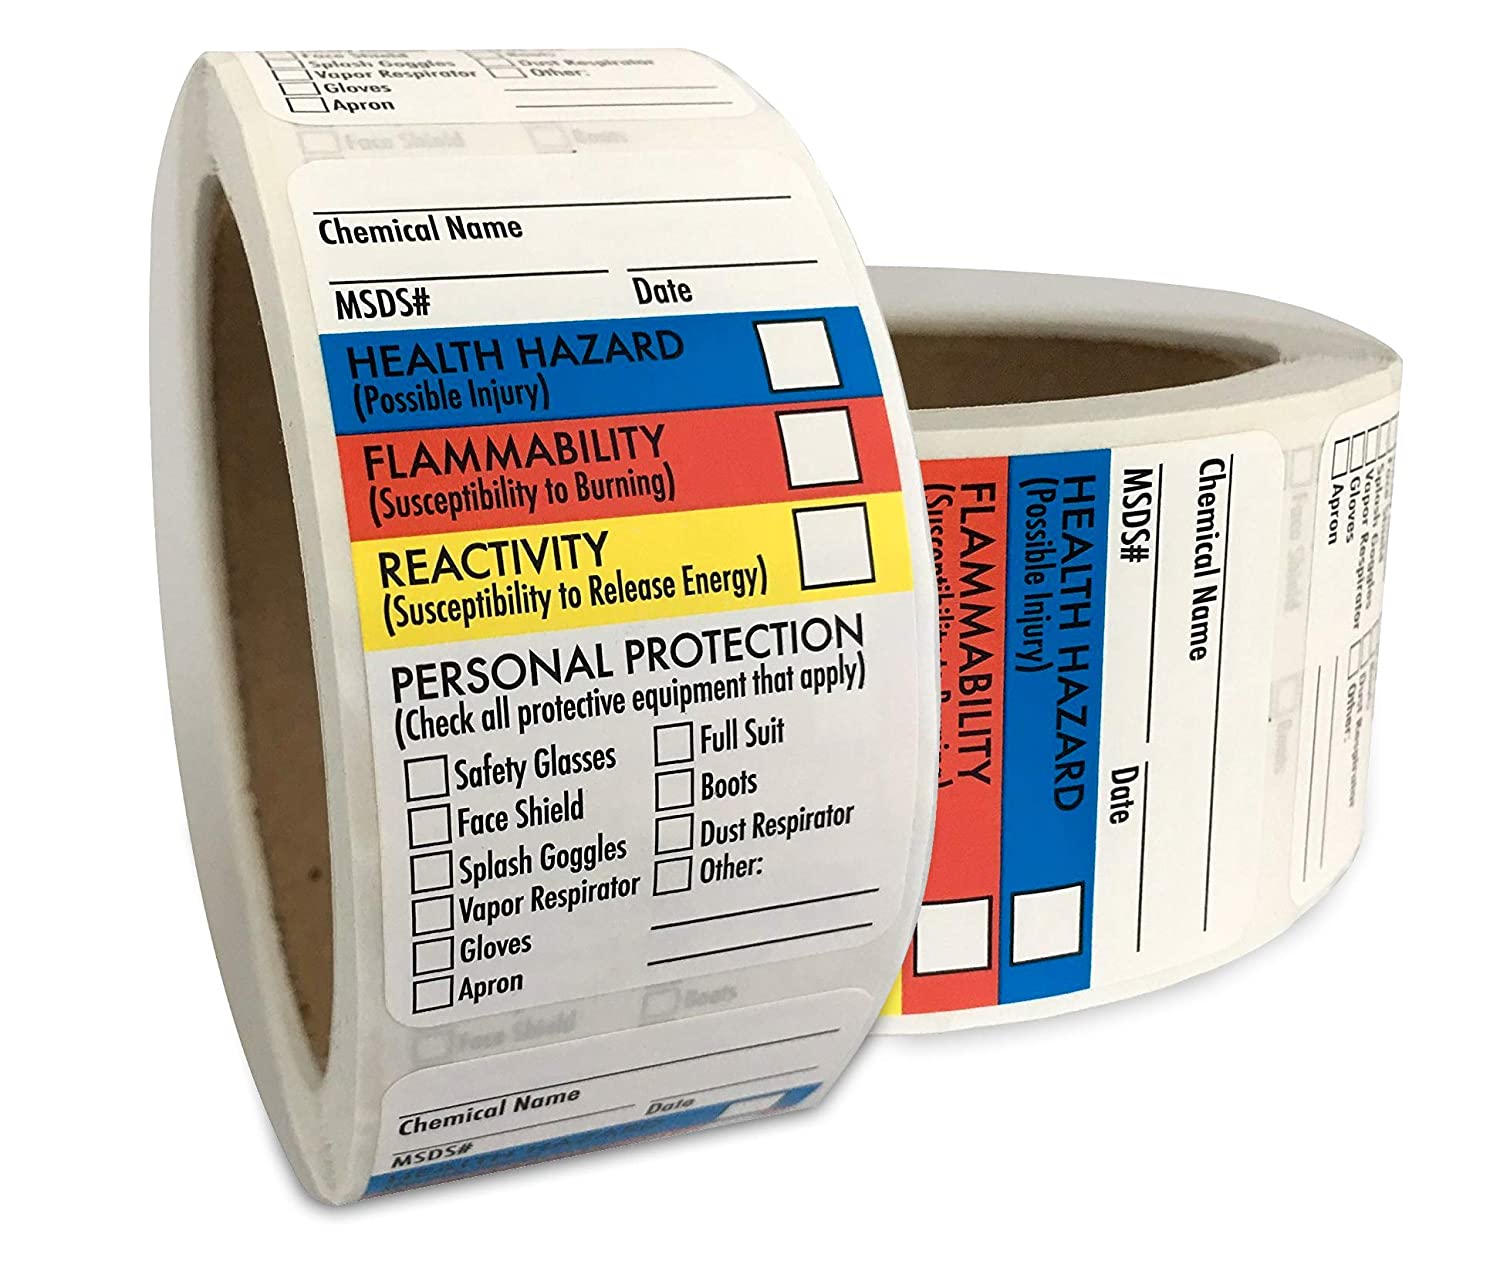 Safety Data Sheet Stickers/MSDS Stickers, 1.5" x 2.5", 250 stickers in a roll, Right To Know- Chemical Identifying and Marking Sticker Decals